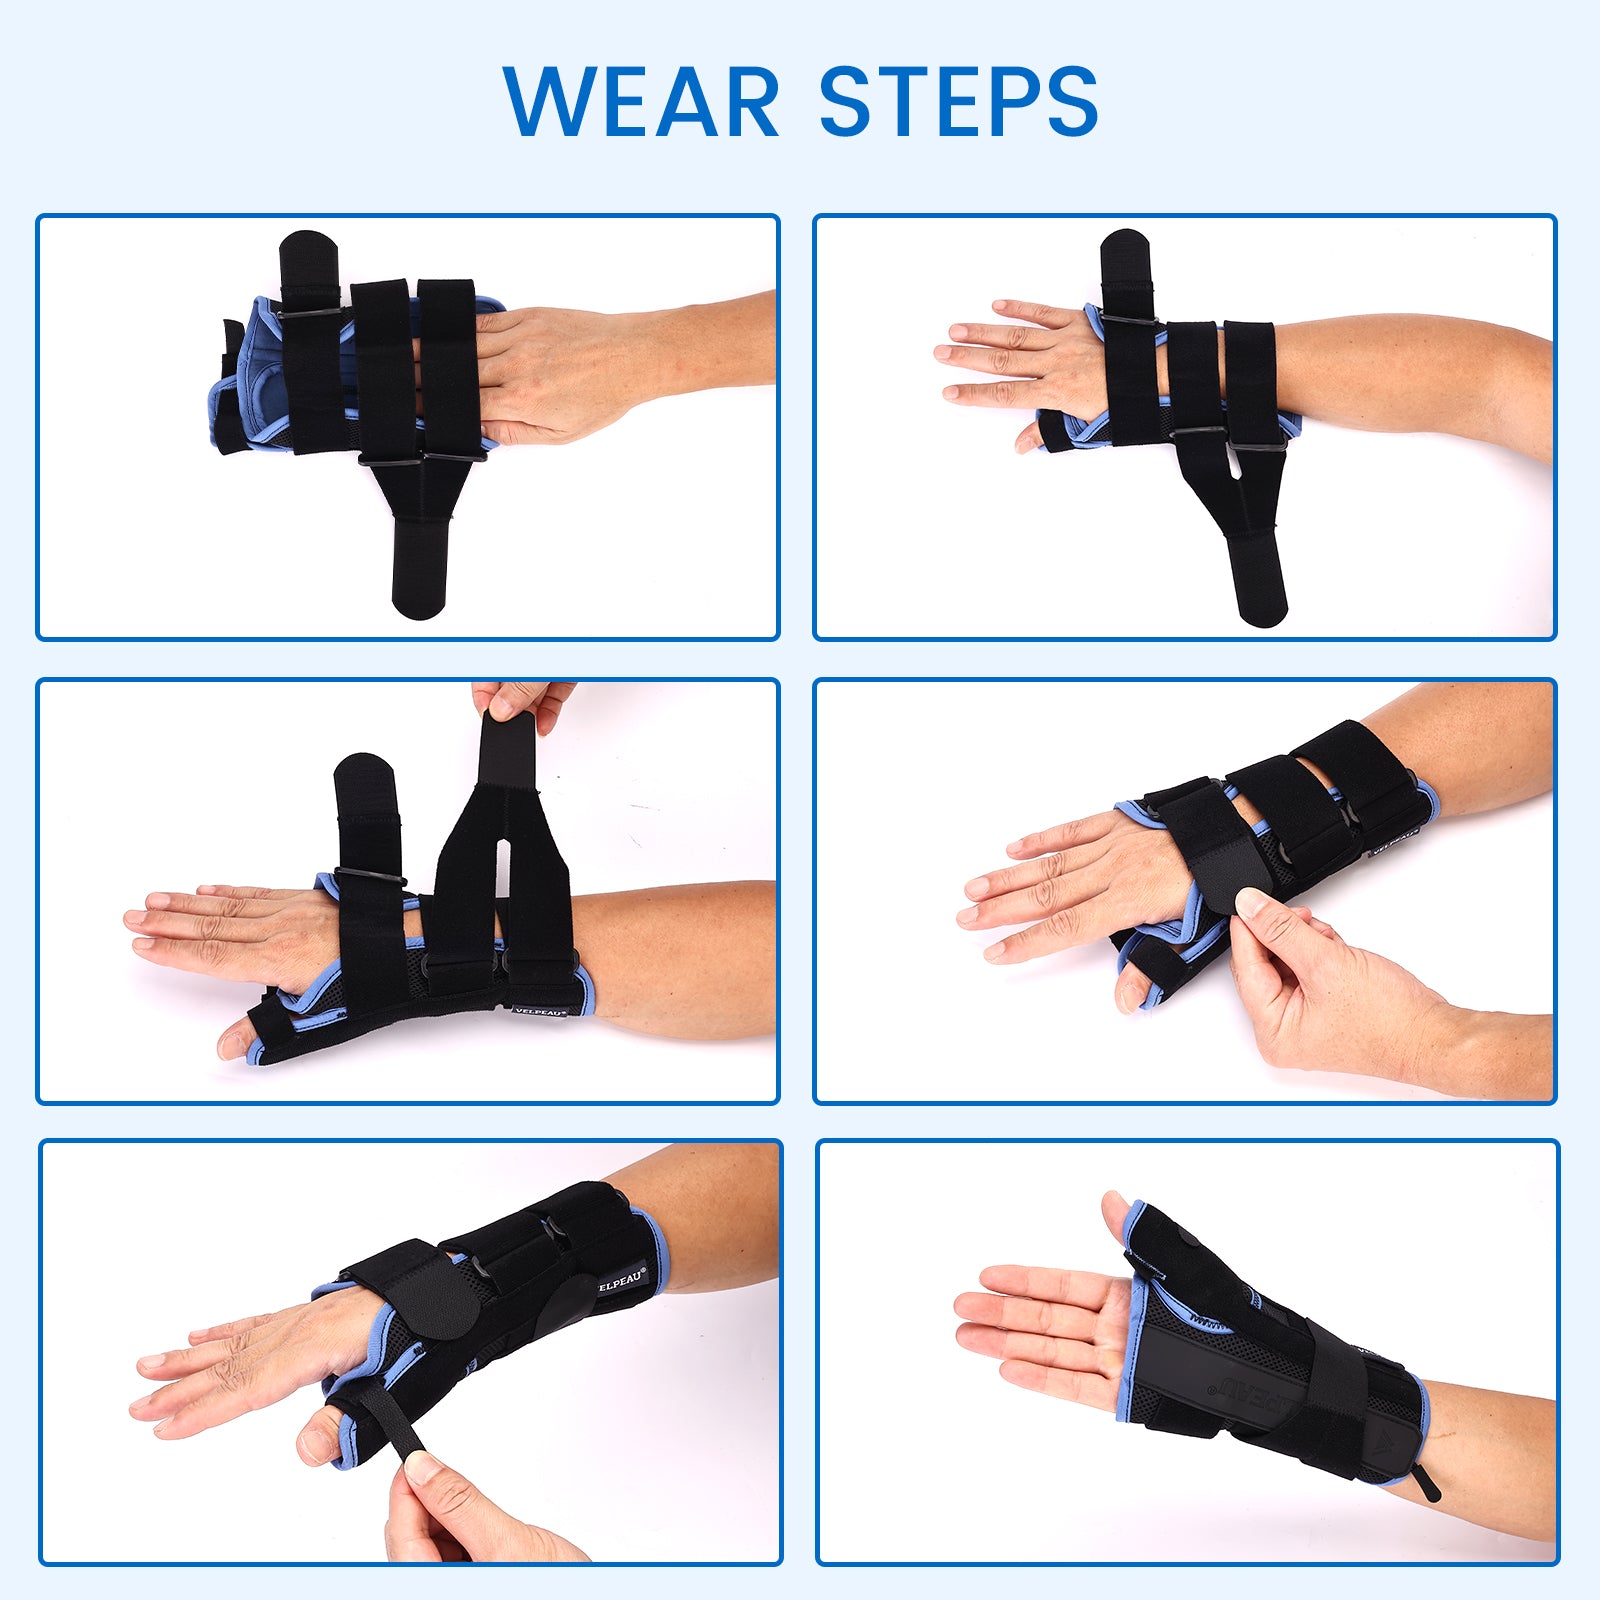 Velpeau thumb wrist brace right hand size s, Health & Nutrition, Braces,  Support & Protection on Carousell